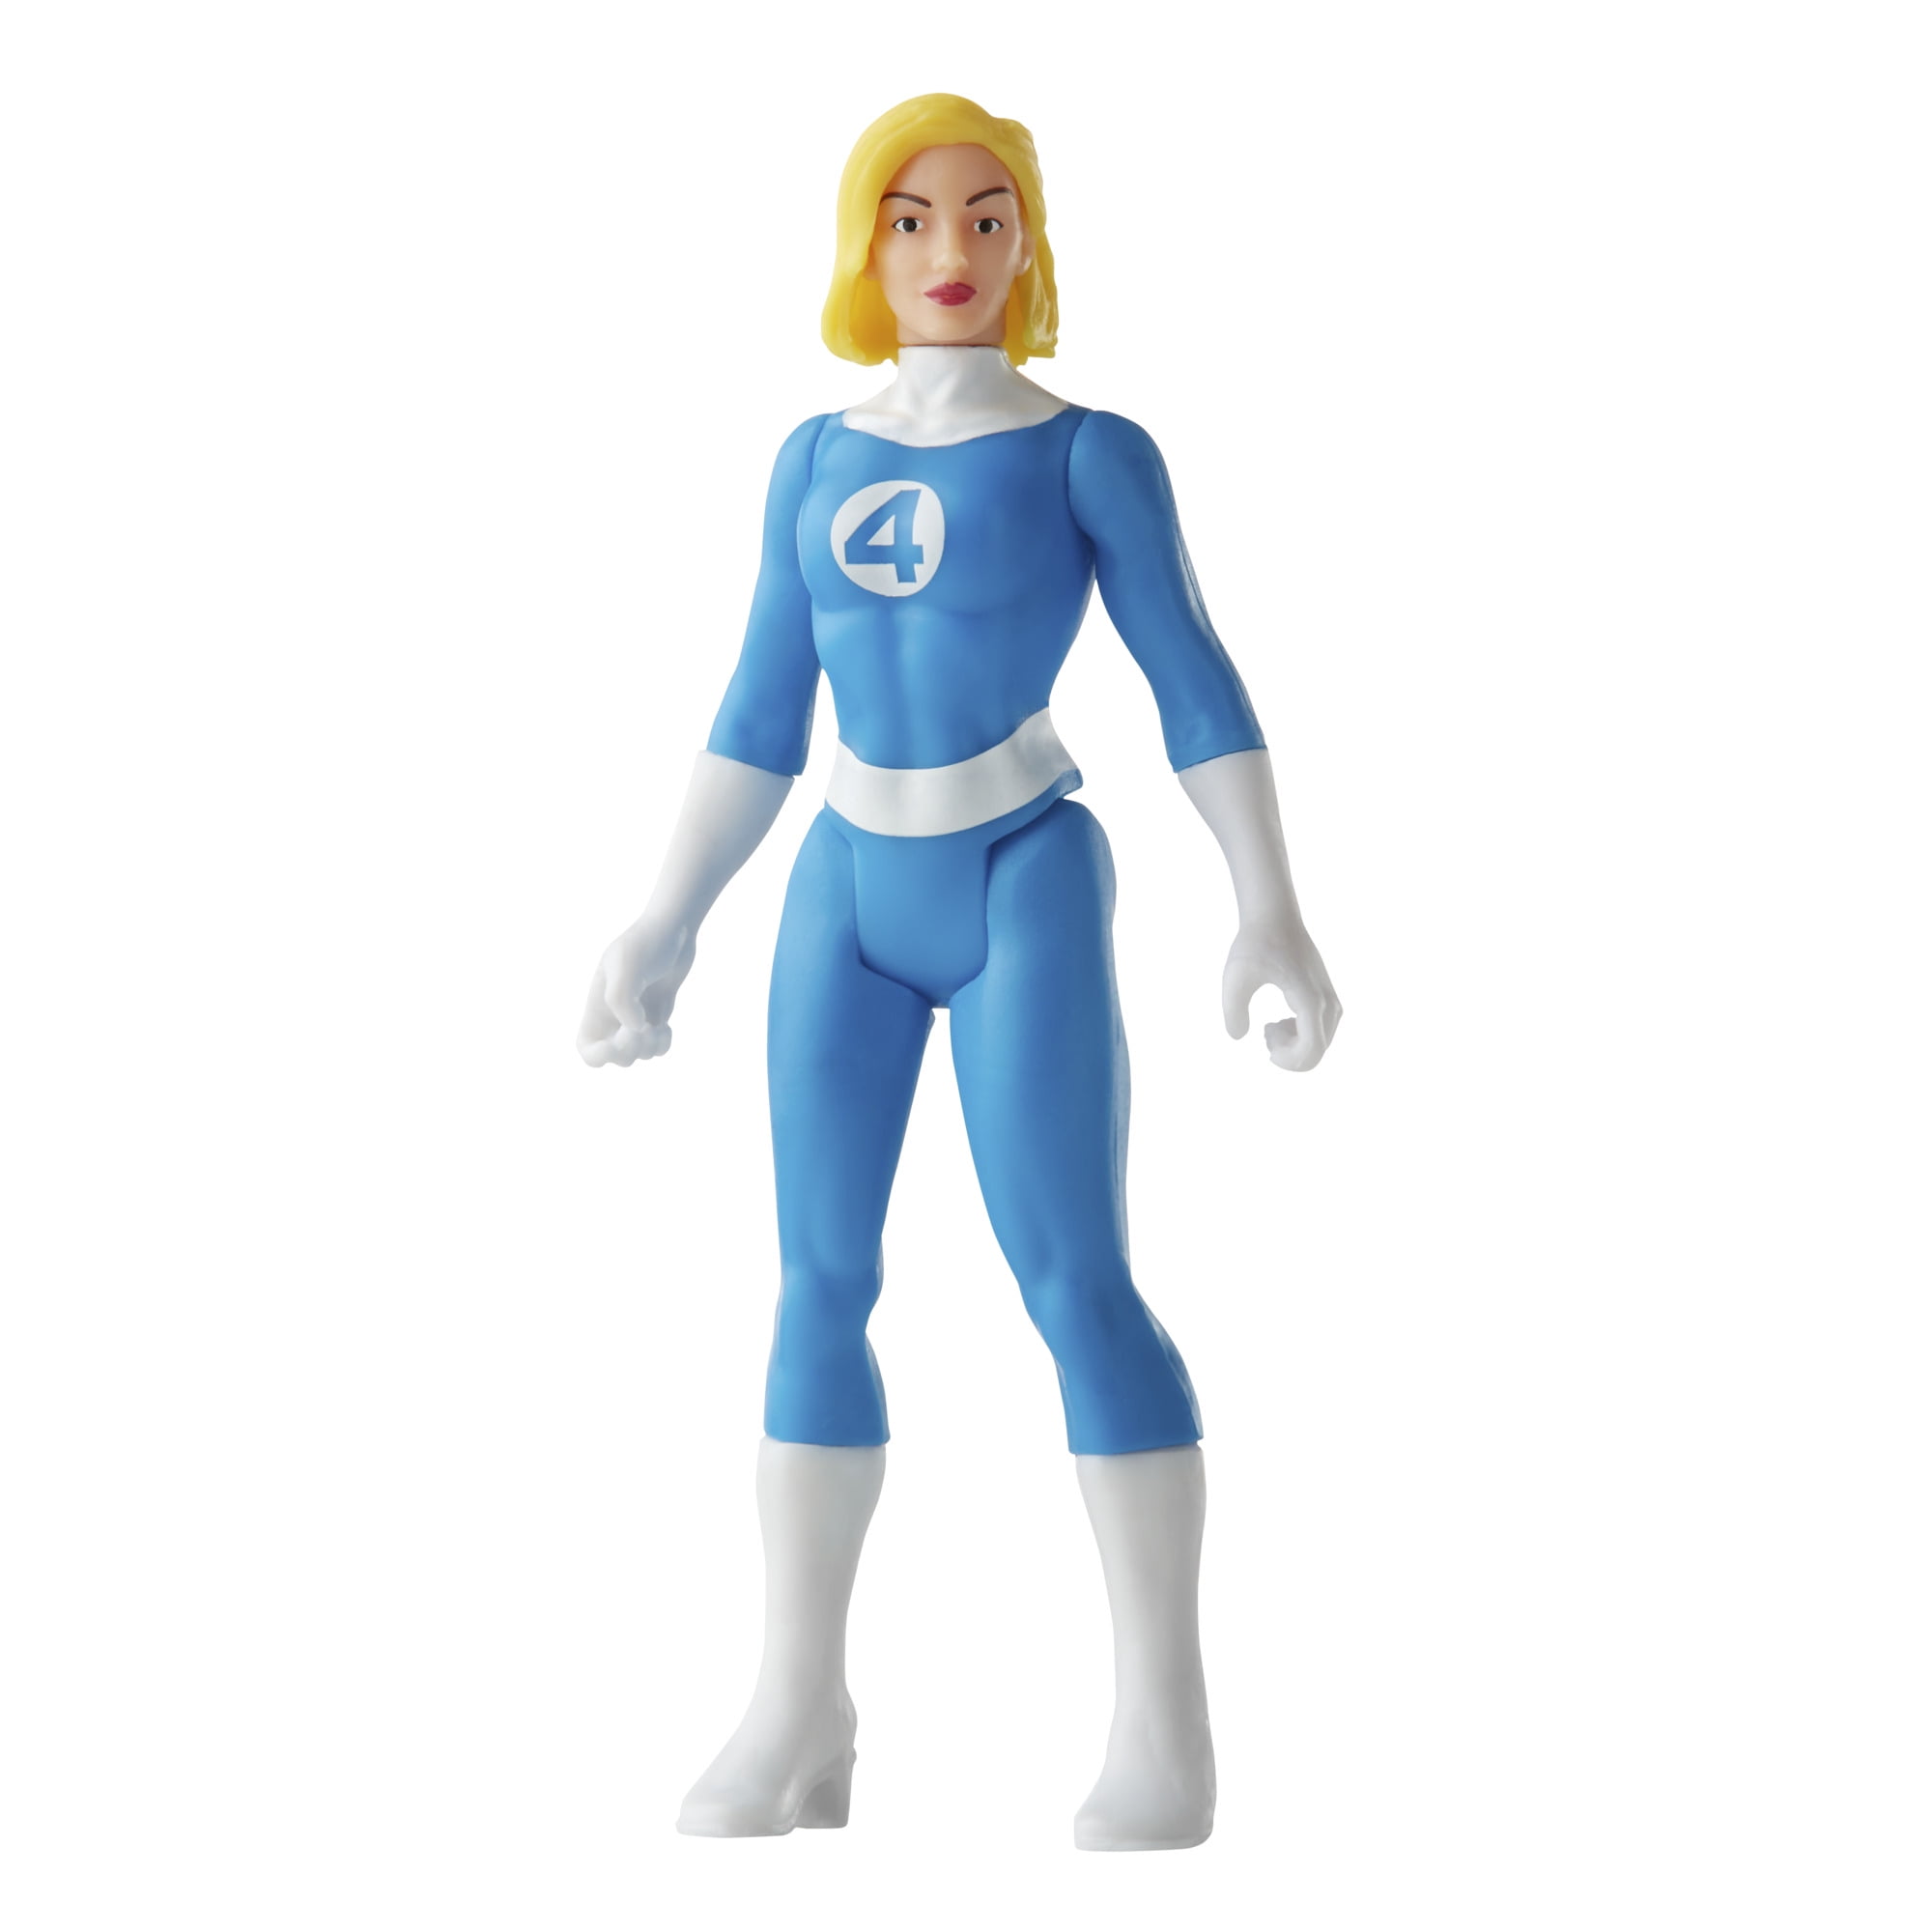 CUSTOM LEGO INVISIBLE WOMAN SUE STORM FIGURE SOLD AS IS FREE SHIPPING WORLDWIDE! 